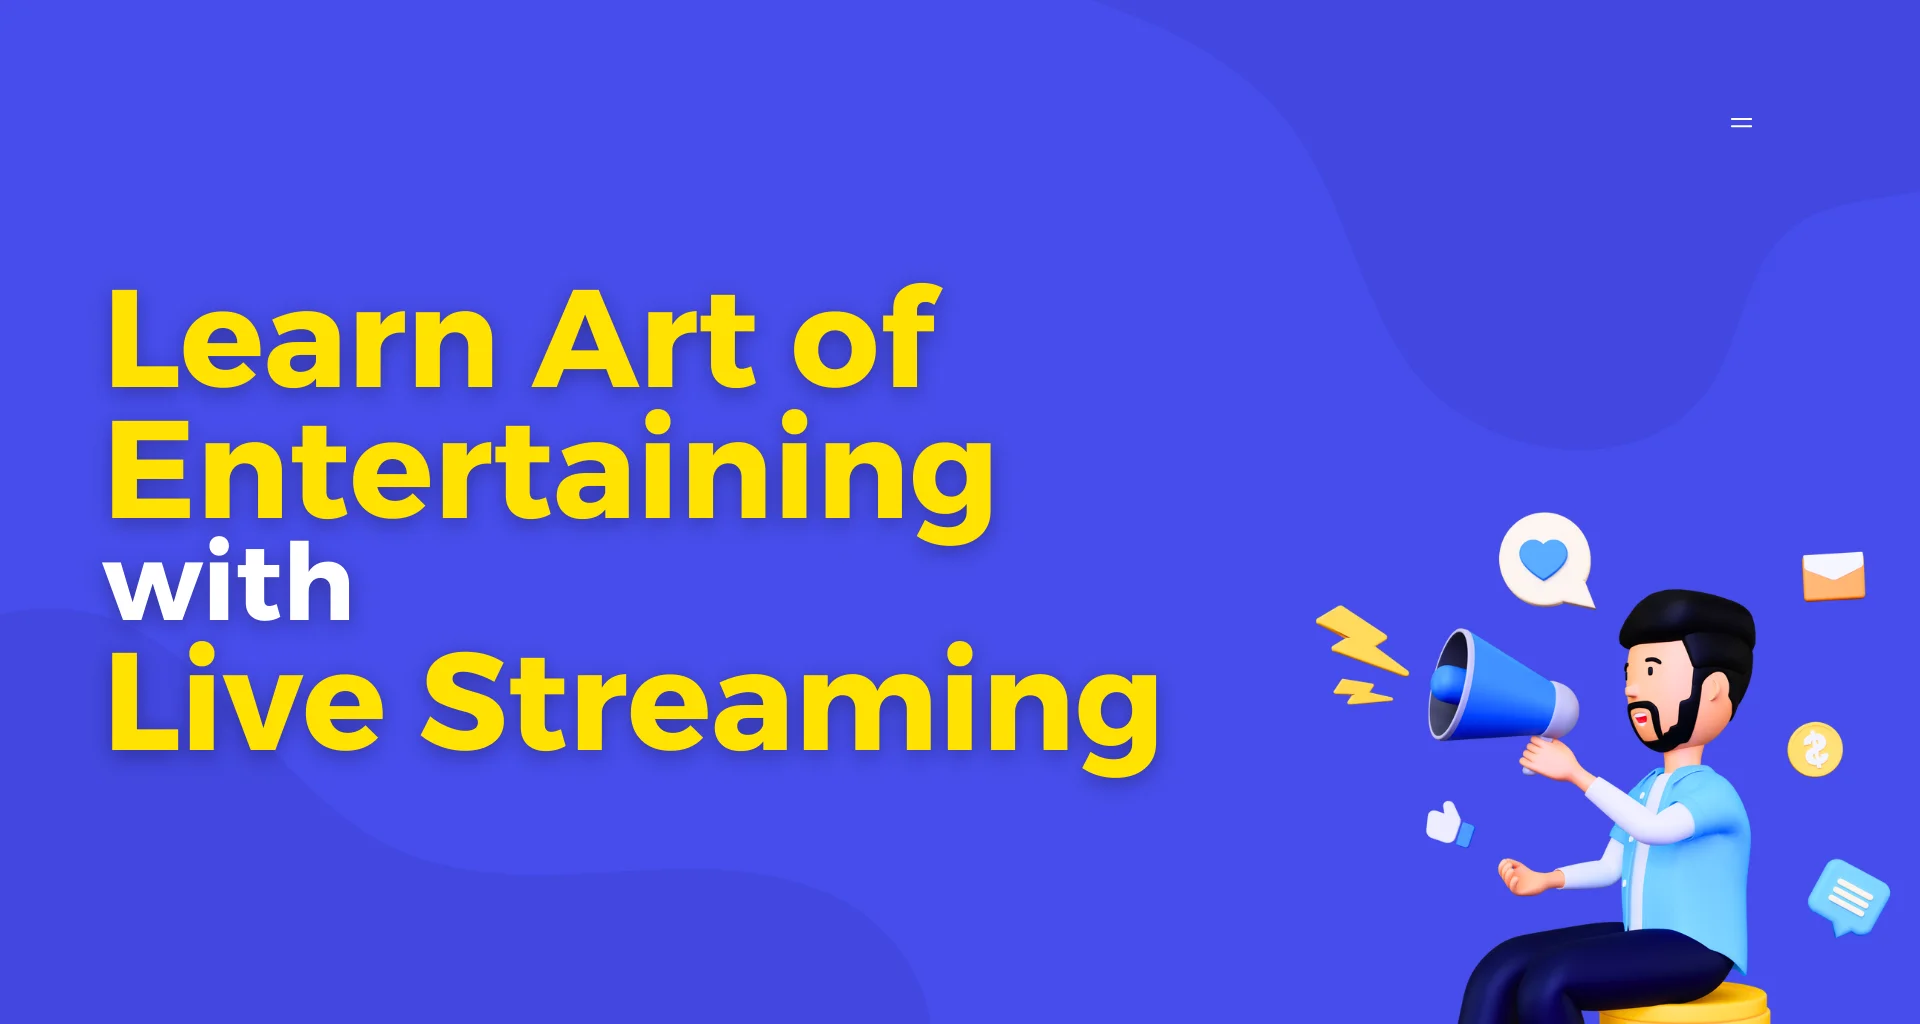 learn the Art of Entertaining with Live Streaming